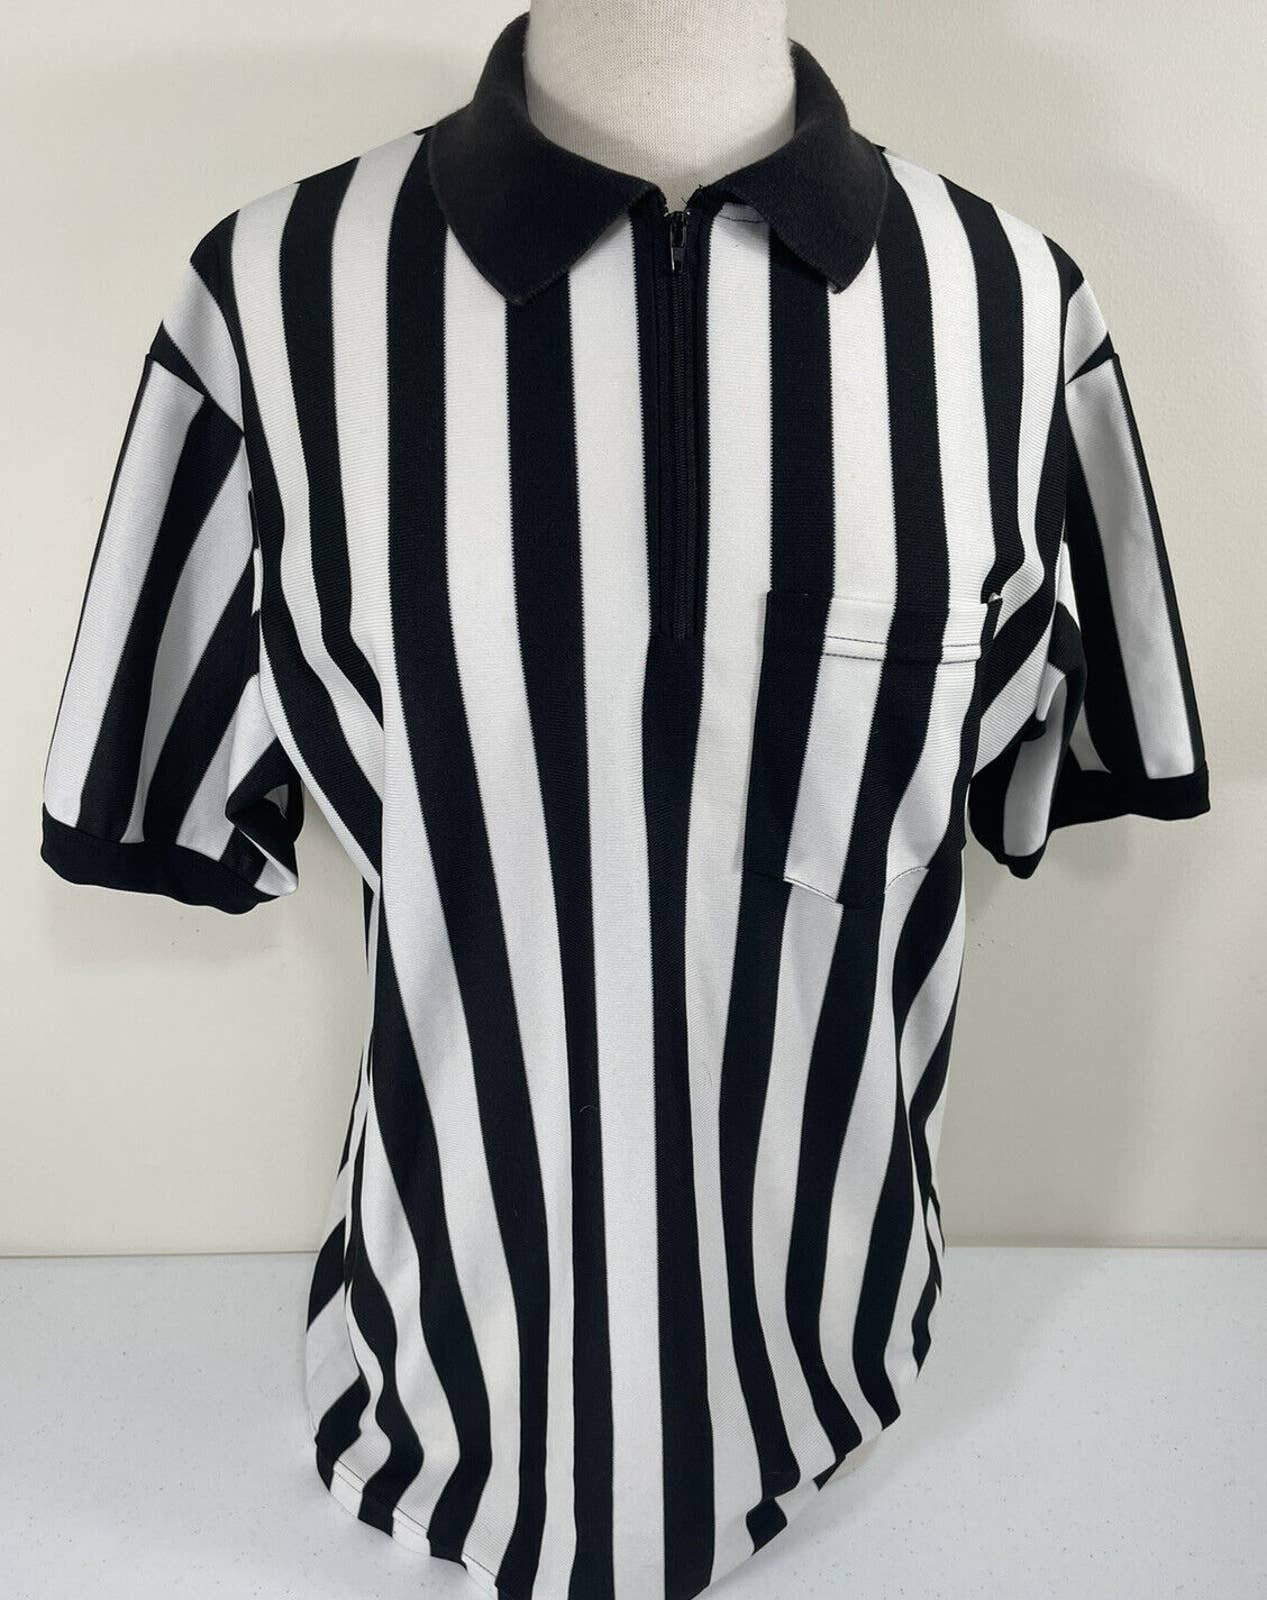 uneeksupply Toptie Men's Pro-Style Referee Shirt with Zipper Personalized with Names, Numbers and Personalized Messages